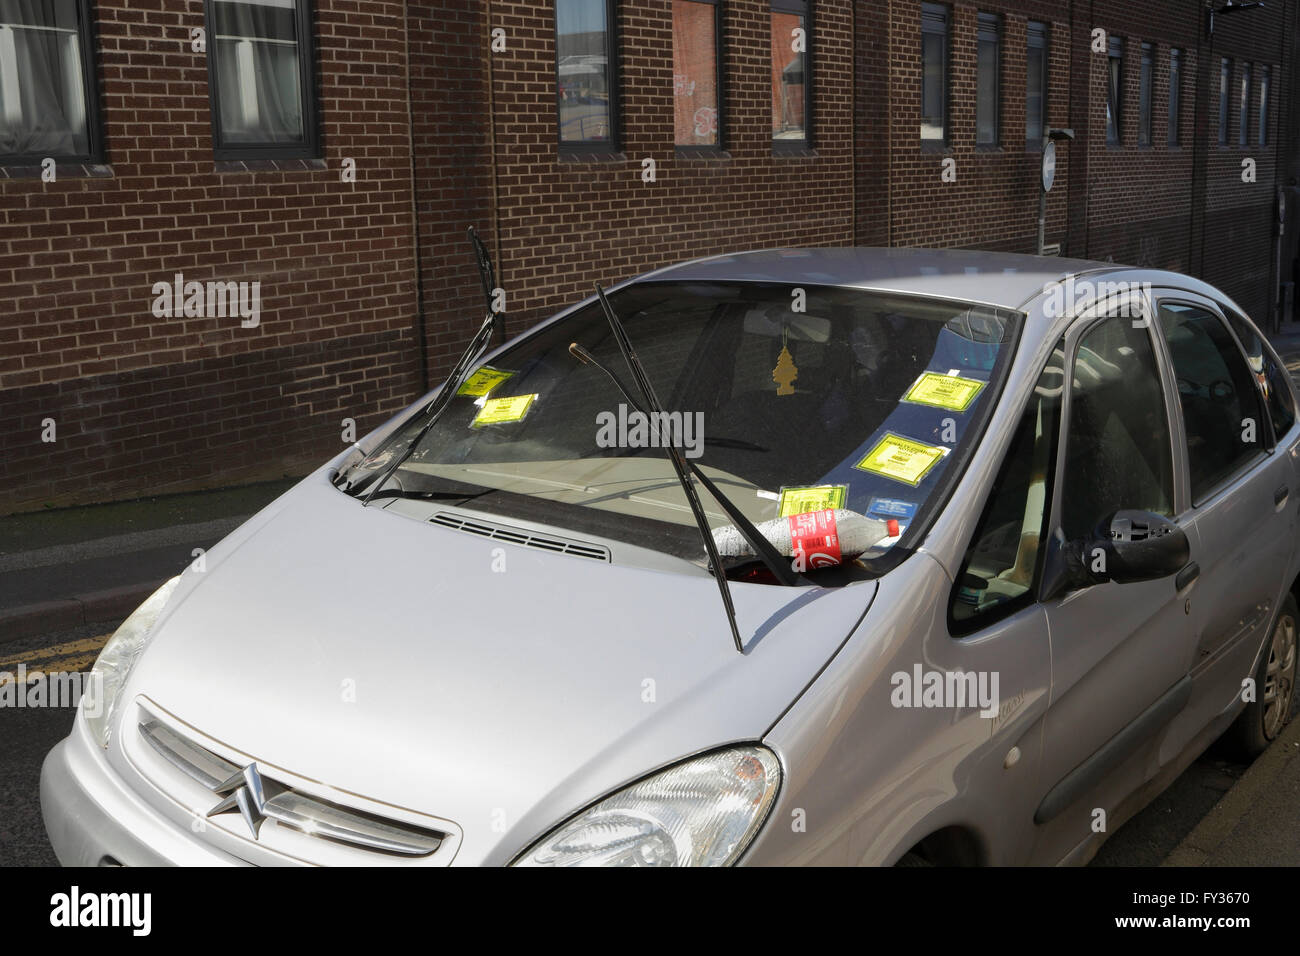 Abandoned car with multiple parking fines in Sheffield England Stock Photo